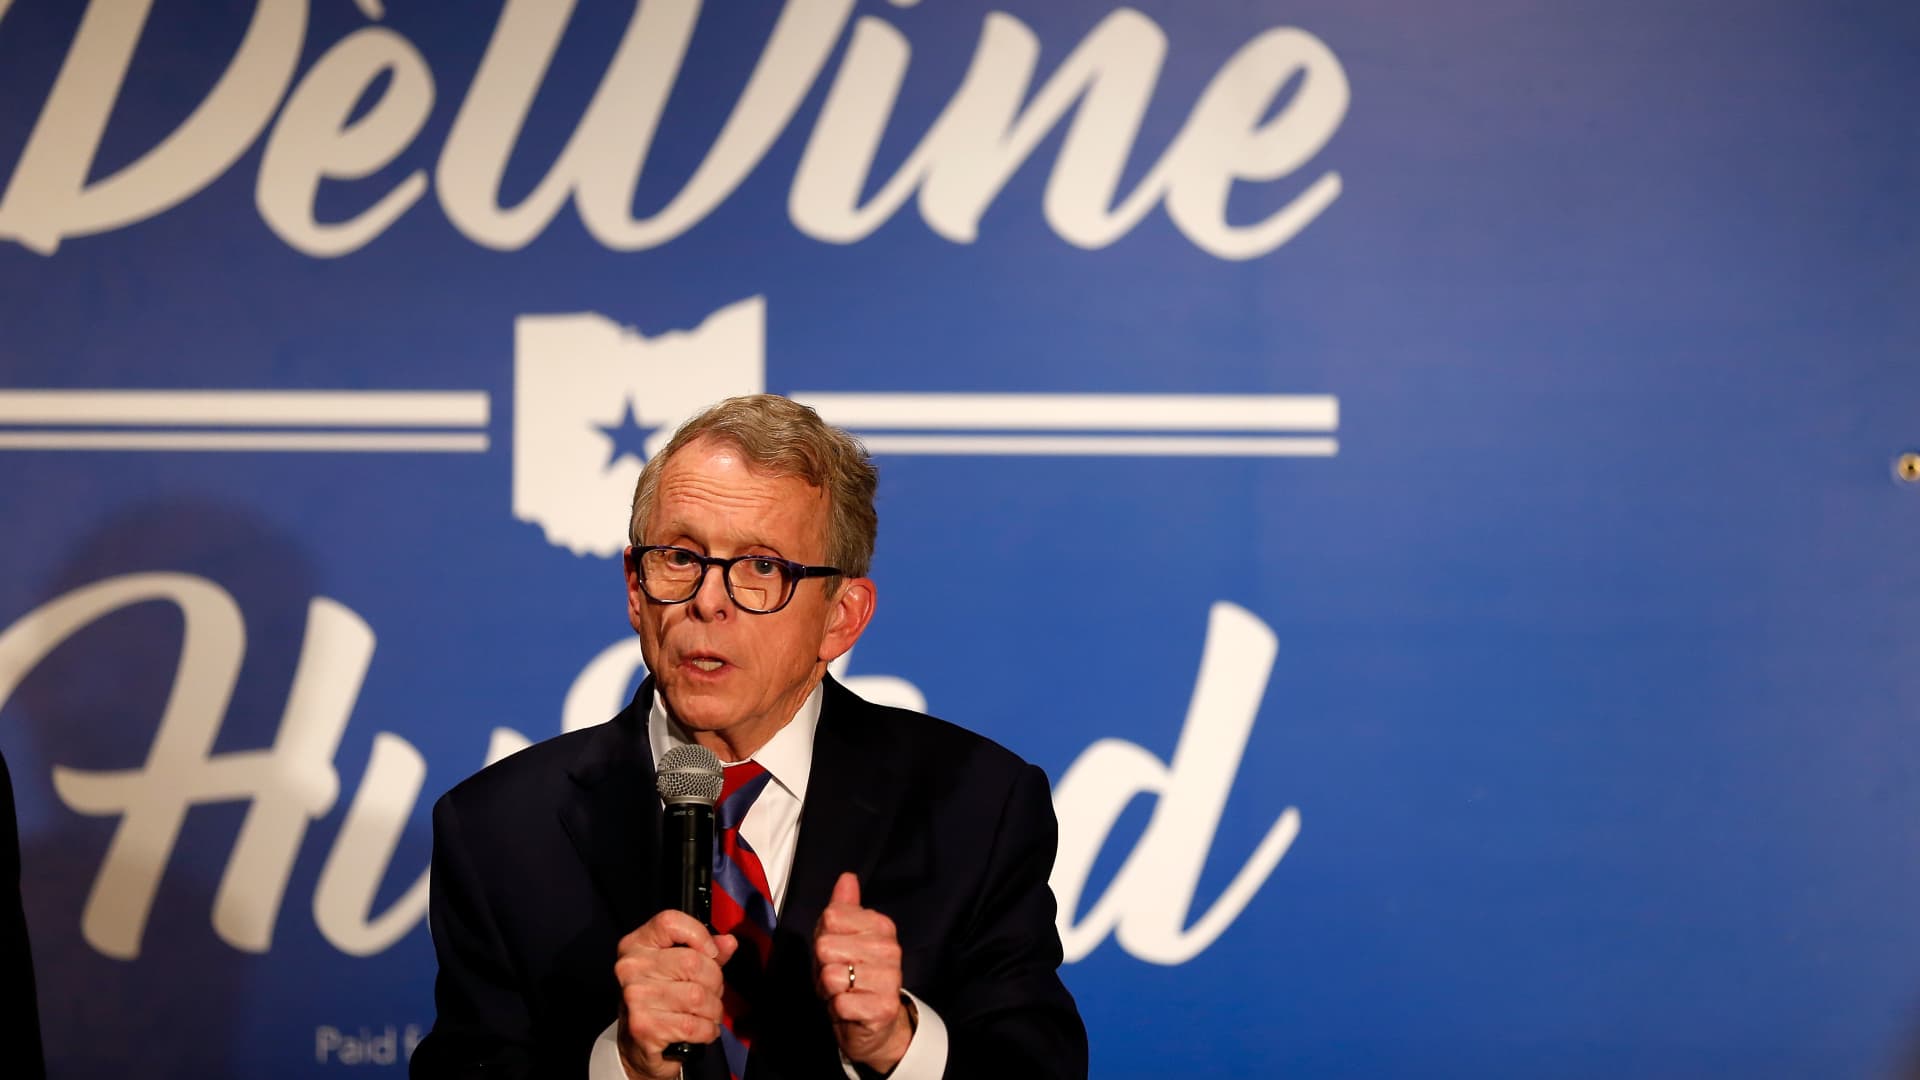 Gov. Mike DeWine, Republican of Ohio, on the campaign trail in 2018. DeWine just signed mandatory personal finance education for high schoolers into state law.